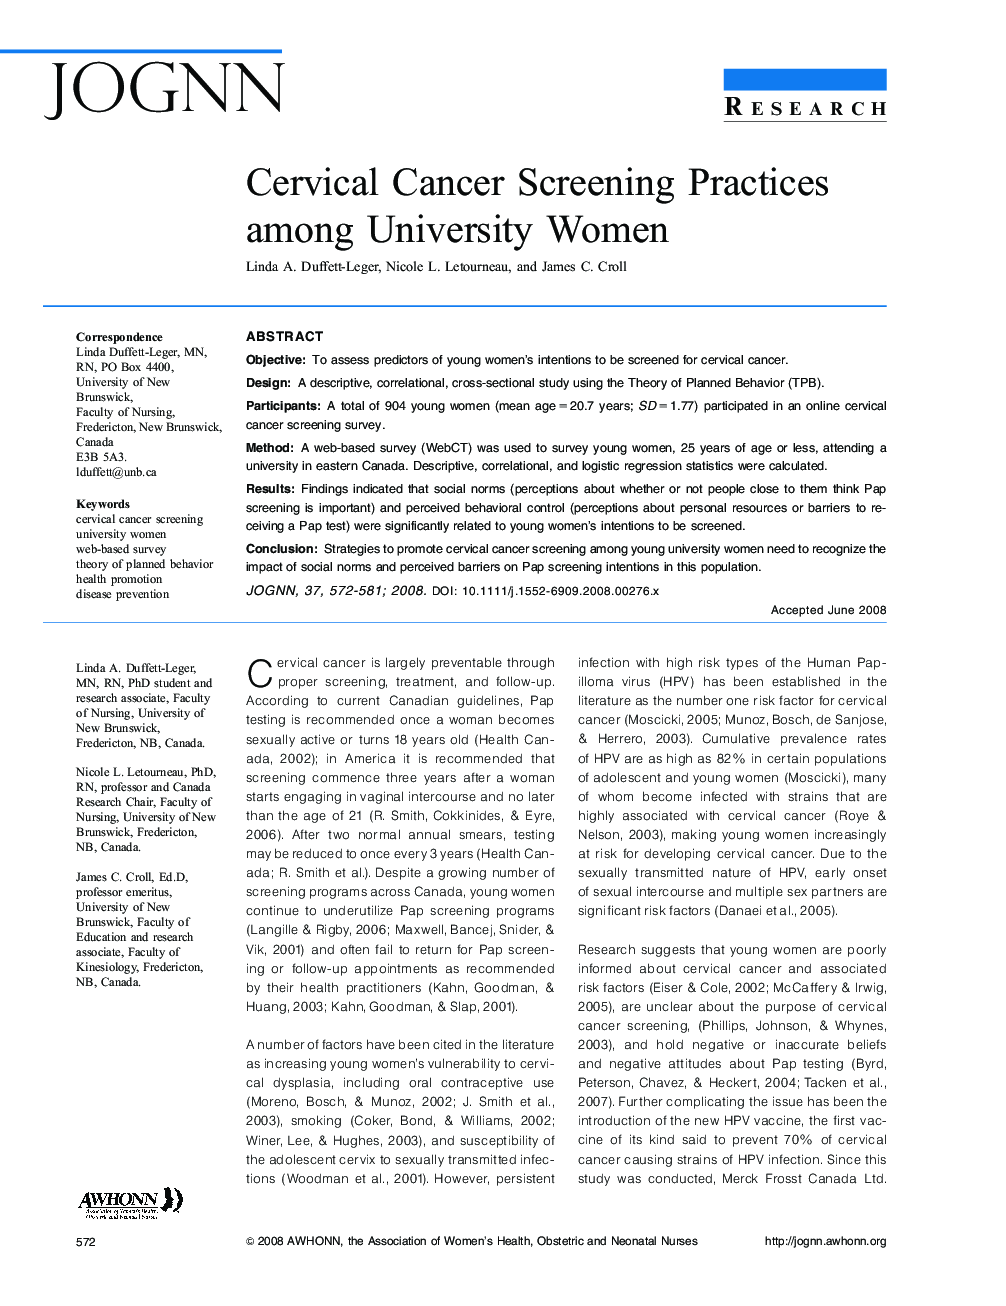 Cervical Cancer Screening Practices among University Women